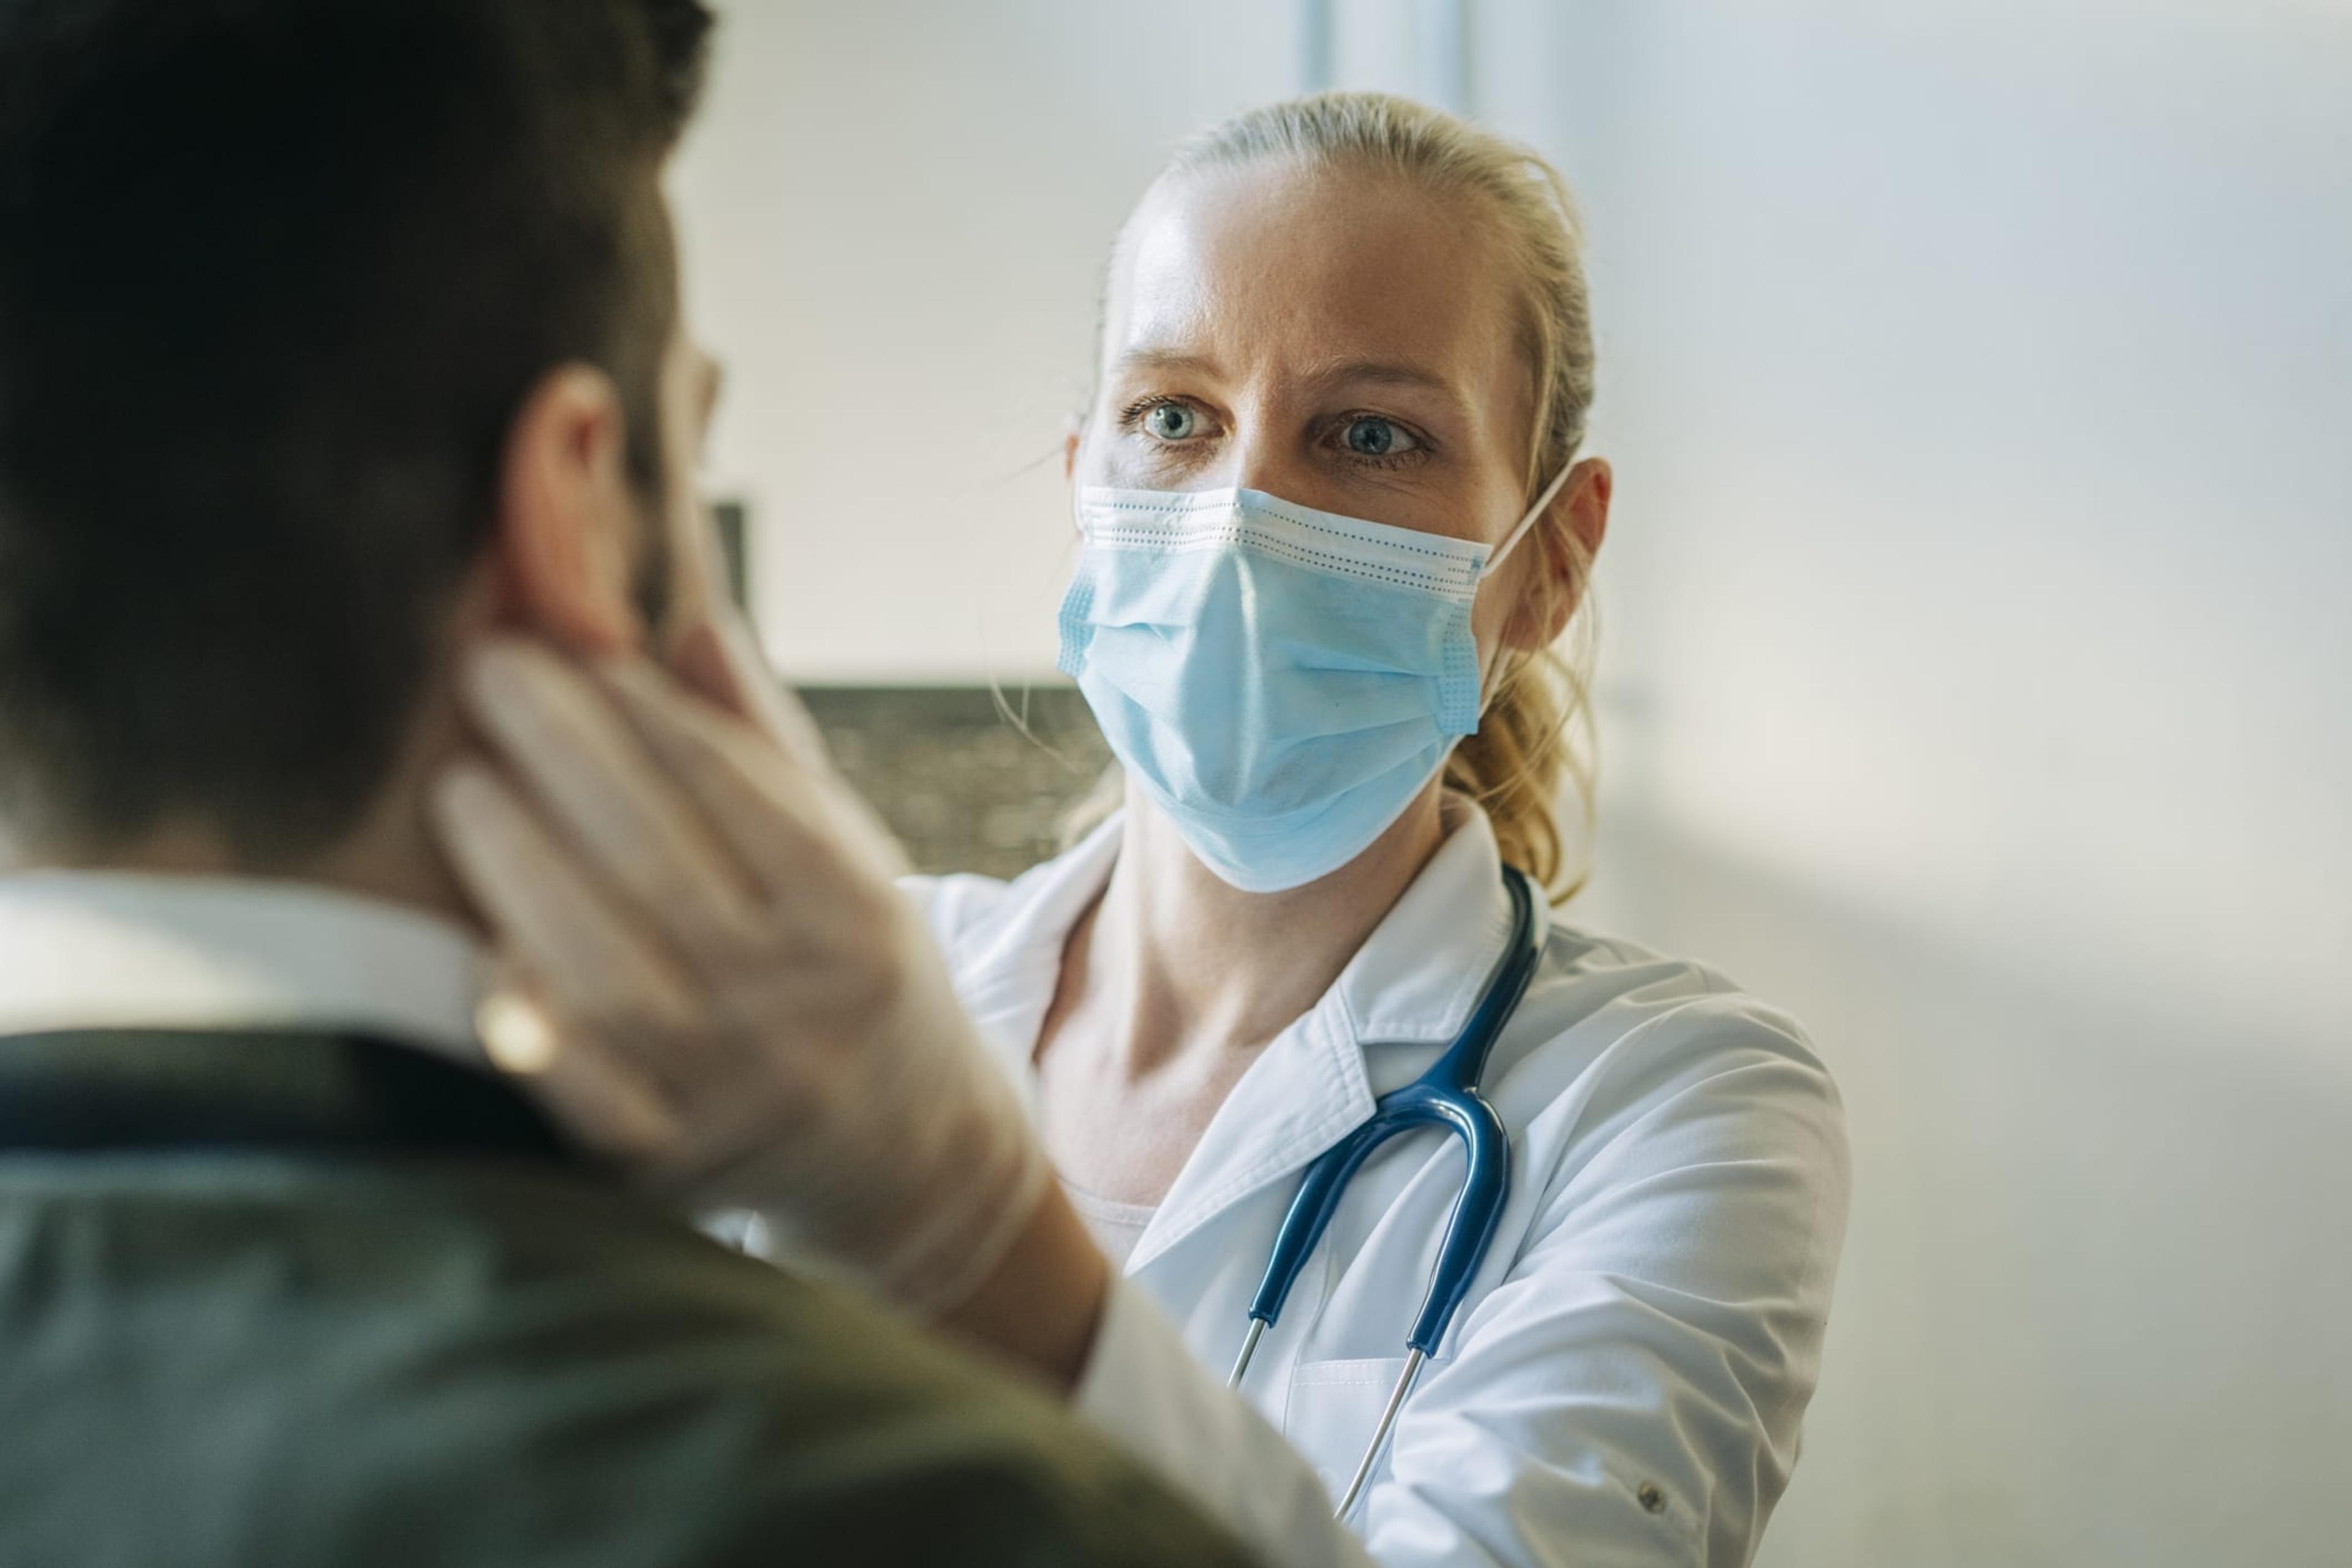 Doctor wearing a mask examining a patient